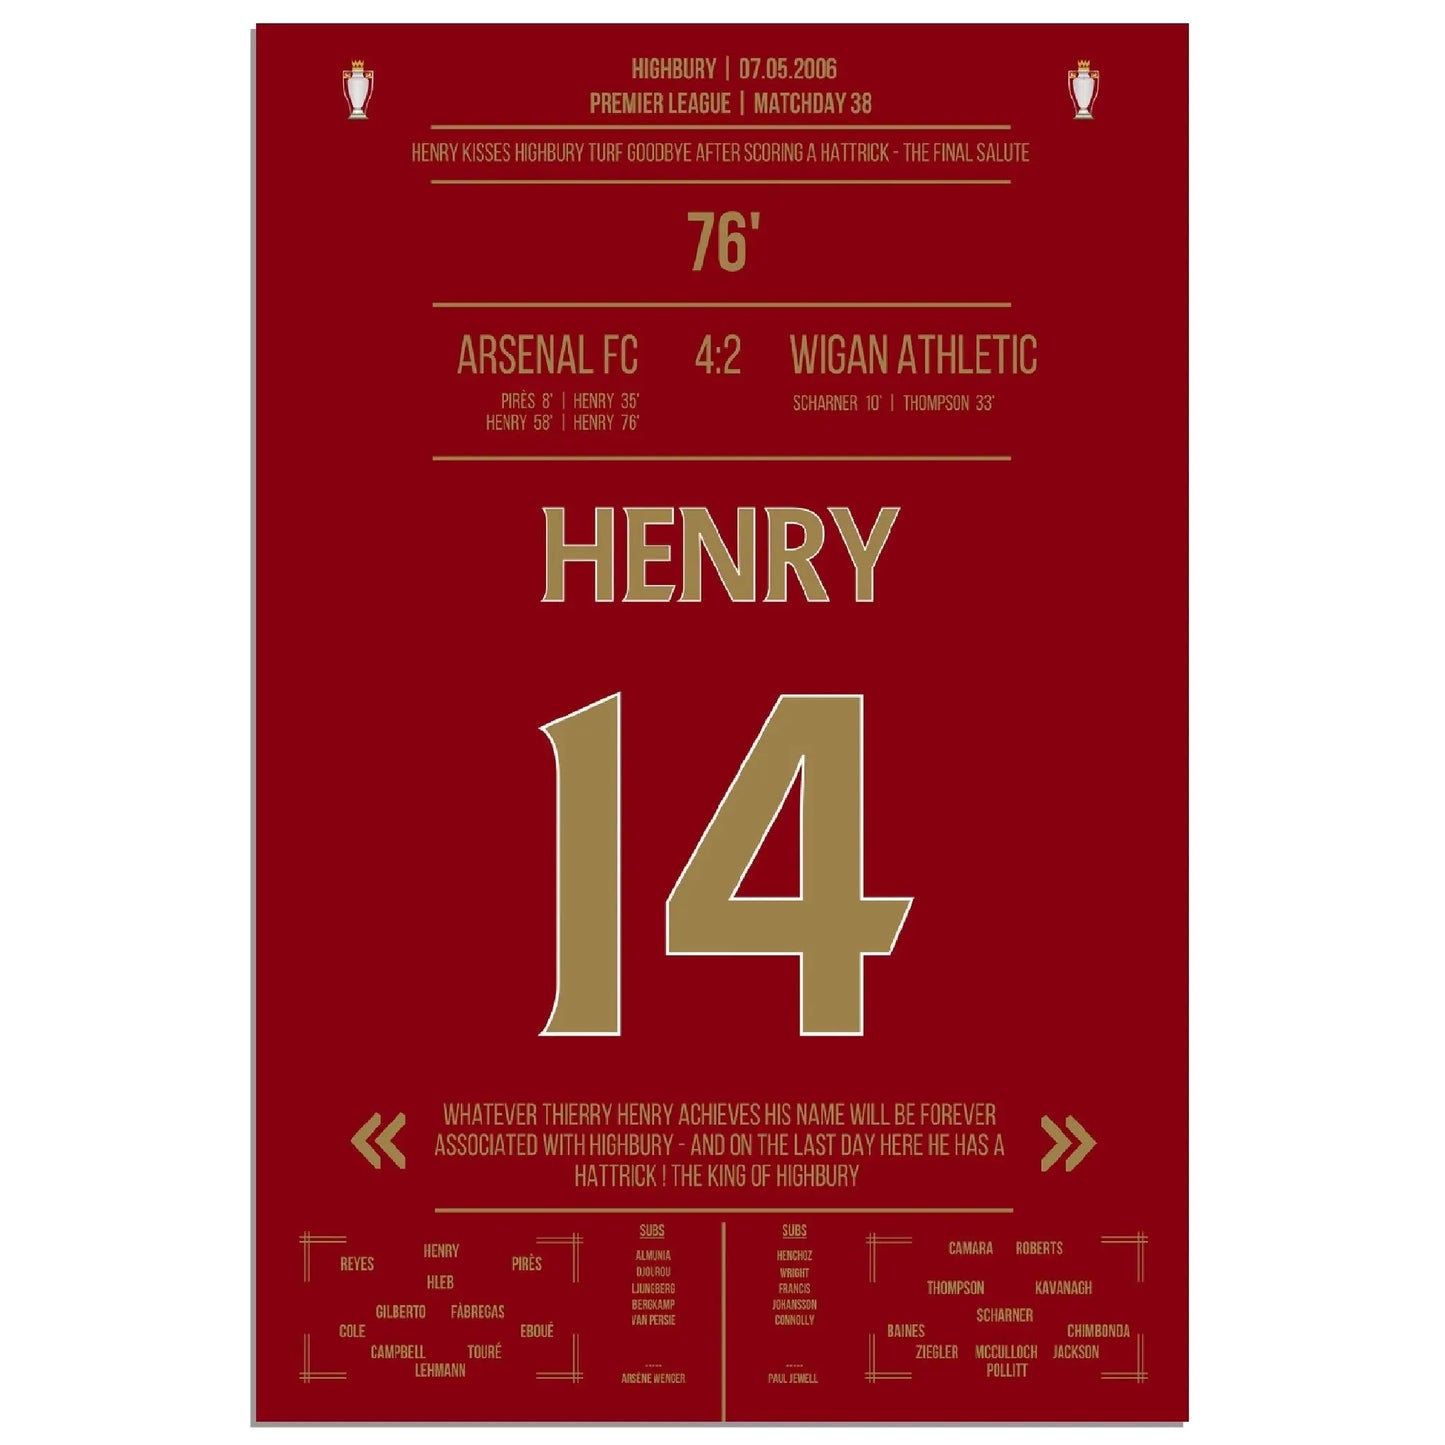 Thierry Henry Hattrick Last Game At Highbury Arsenal - Wigan - The Final Salute 